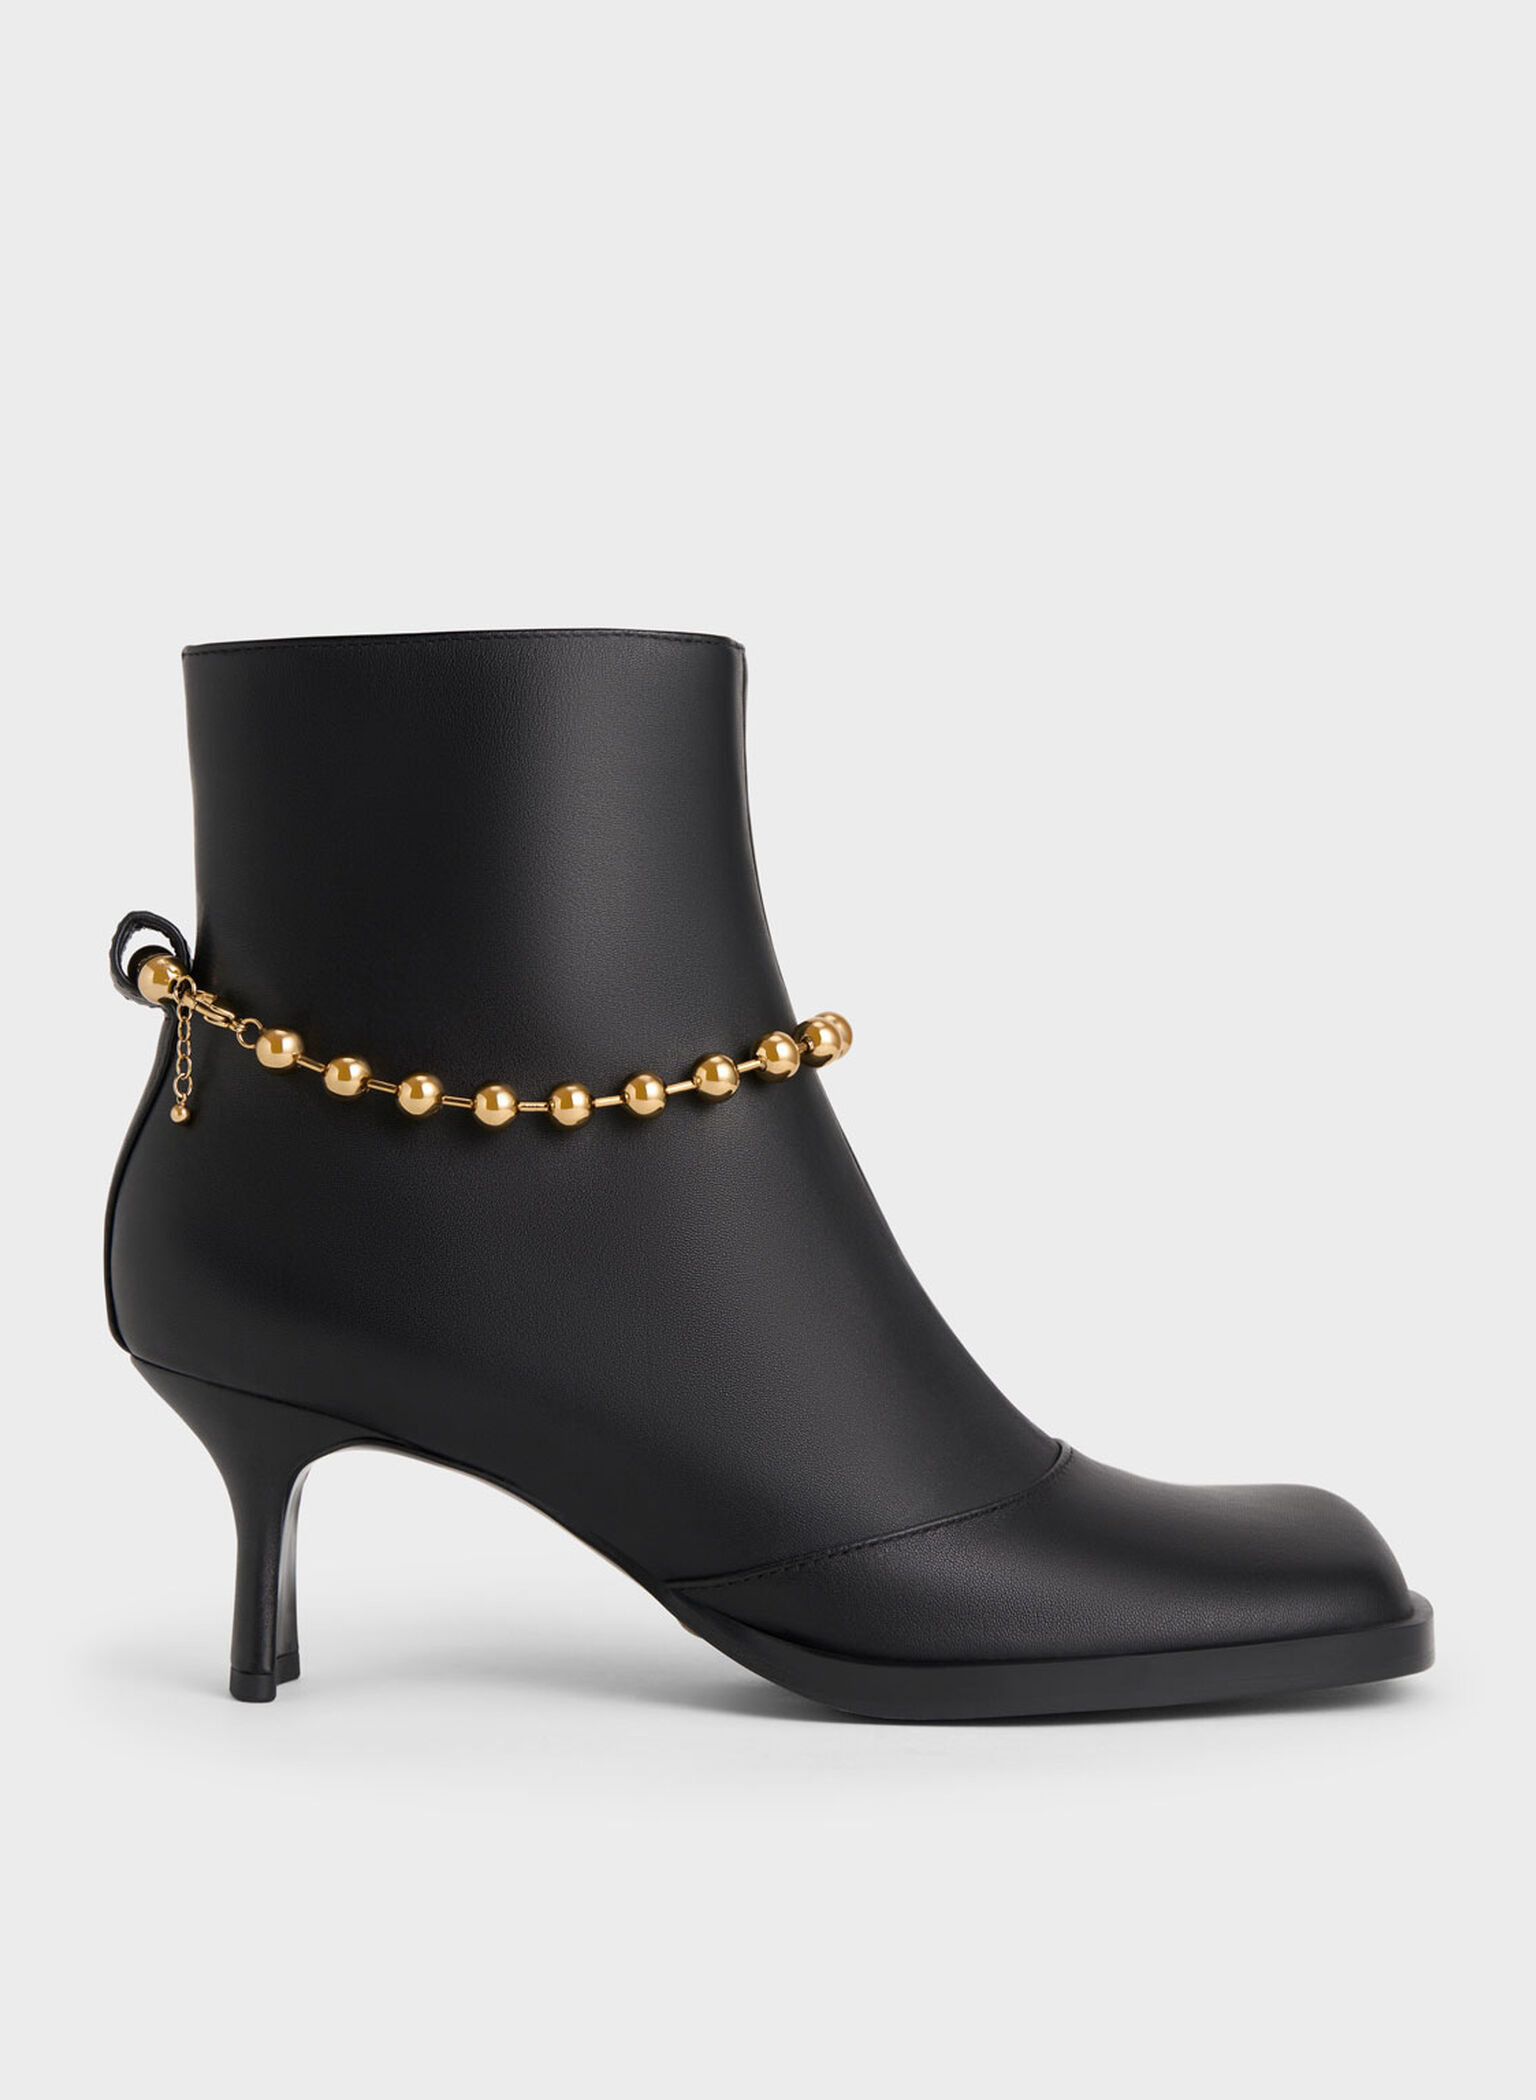 Beaded-Link Leather Ankle Boots, Black, hi-res